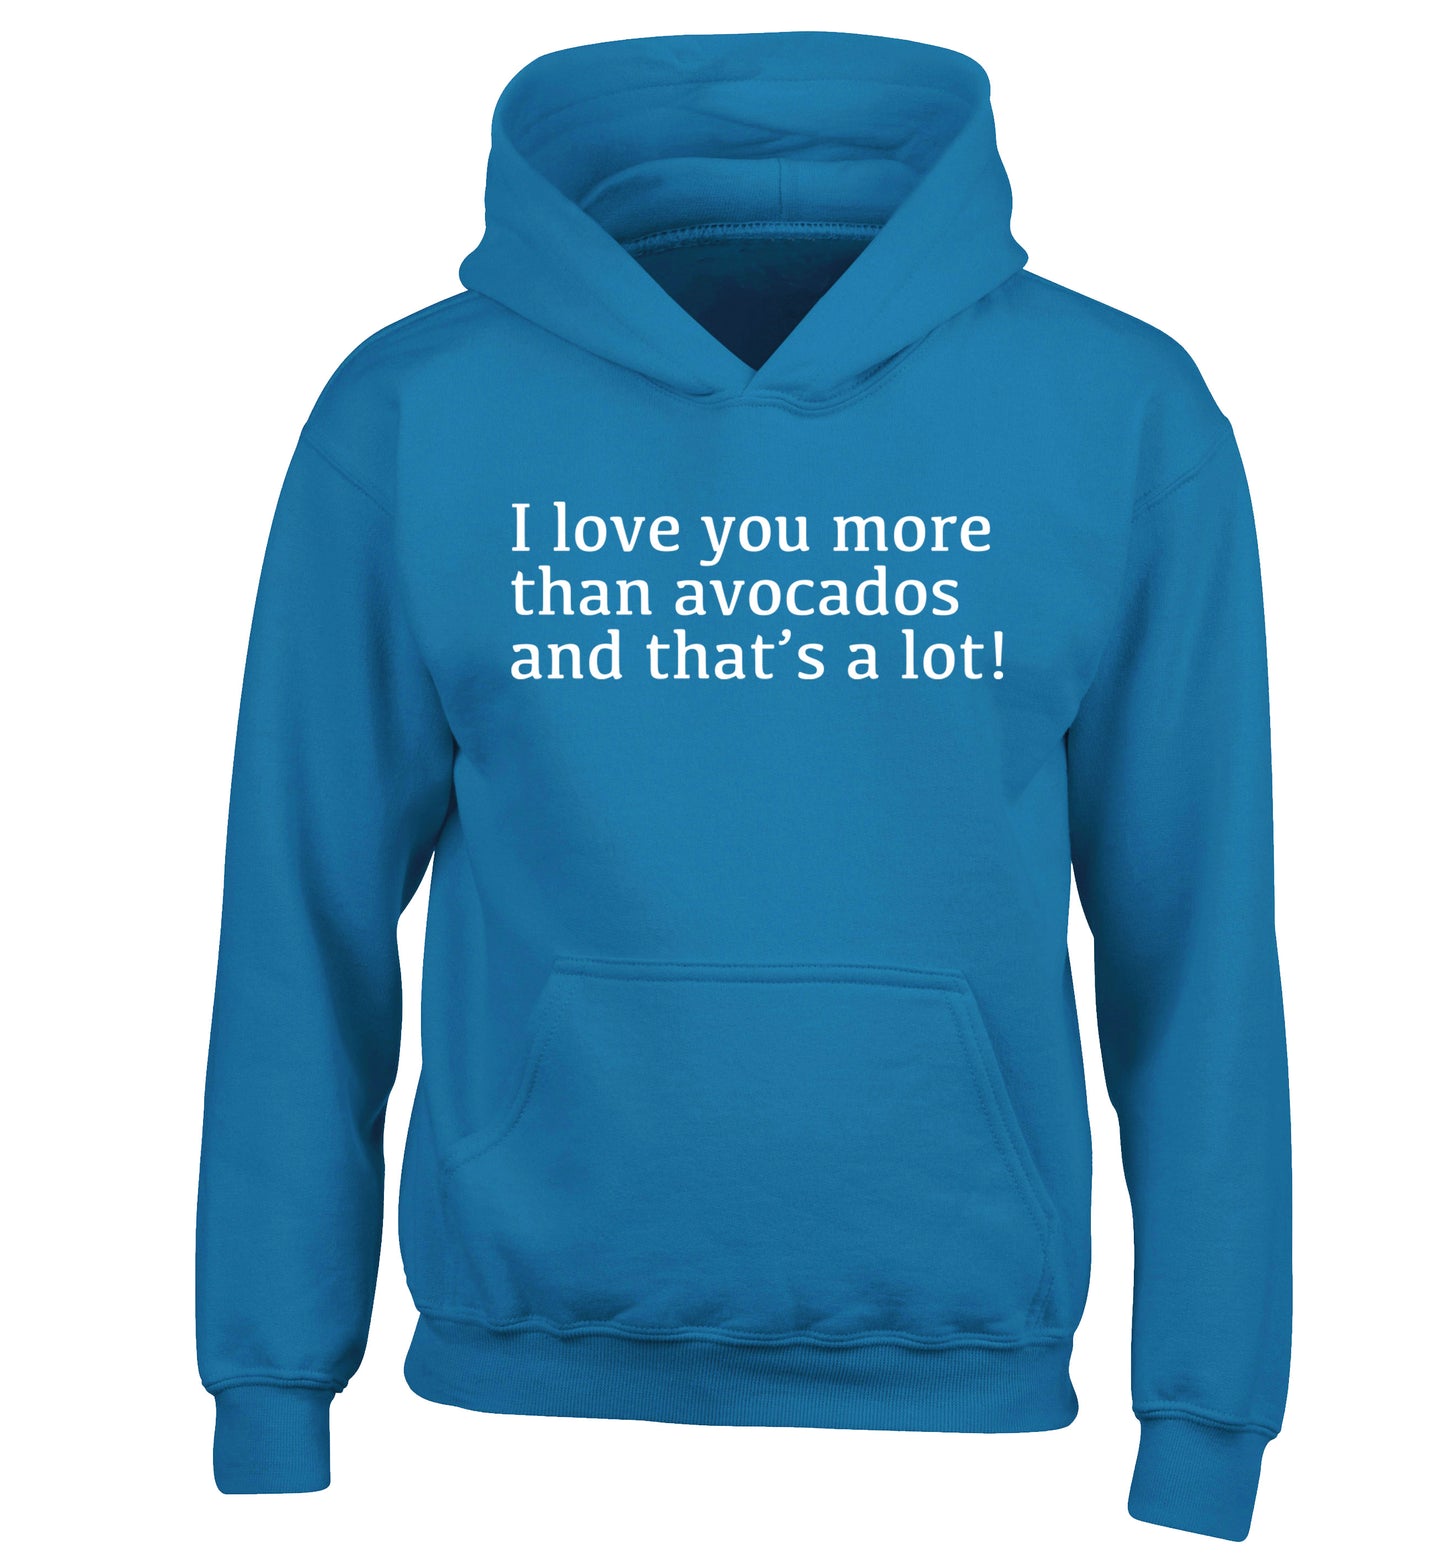 I love you more than avocados and that's a lot children's blue hoodie 12-14 Years